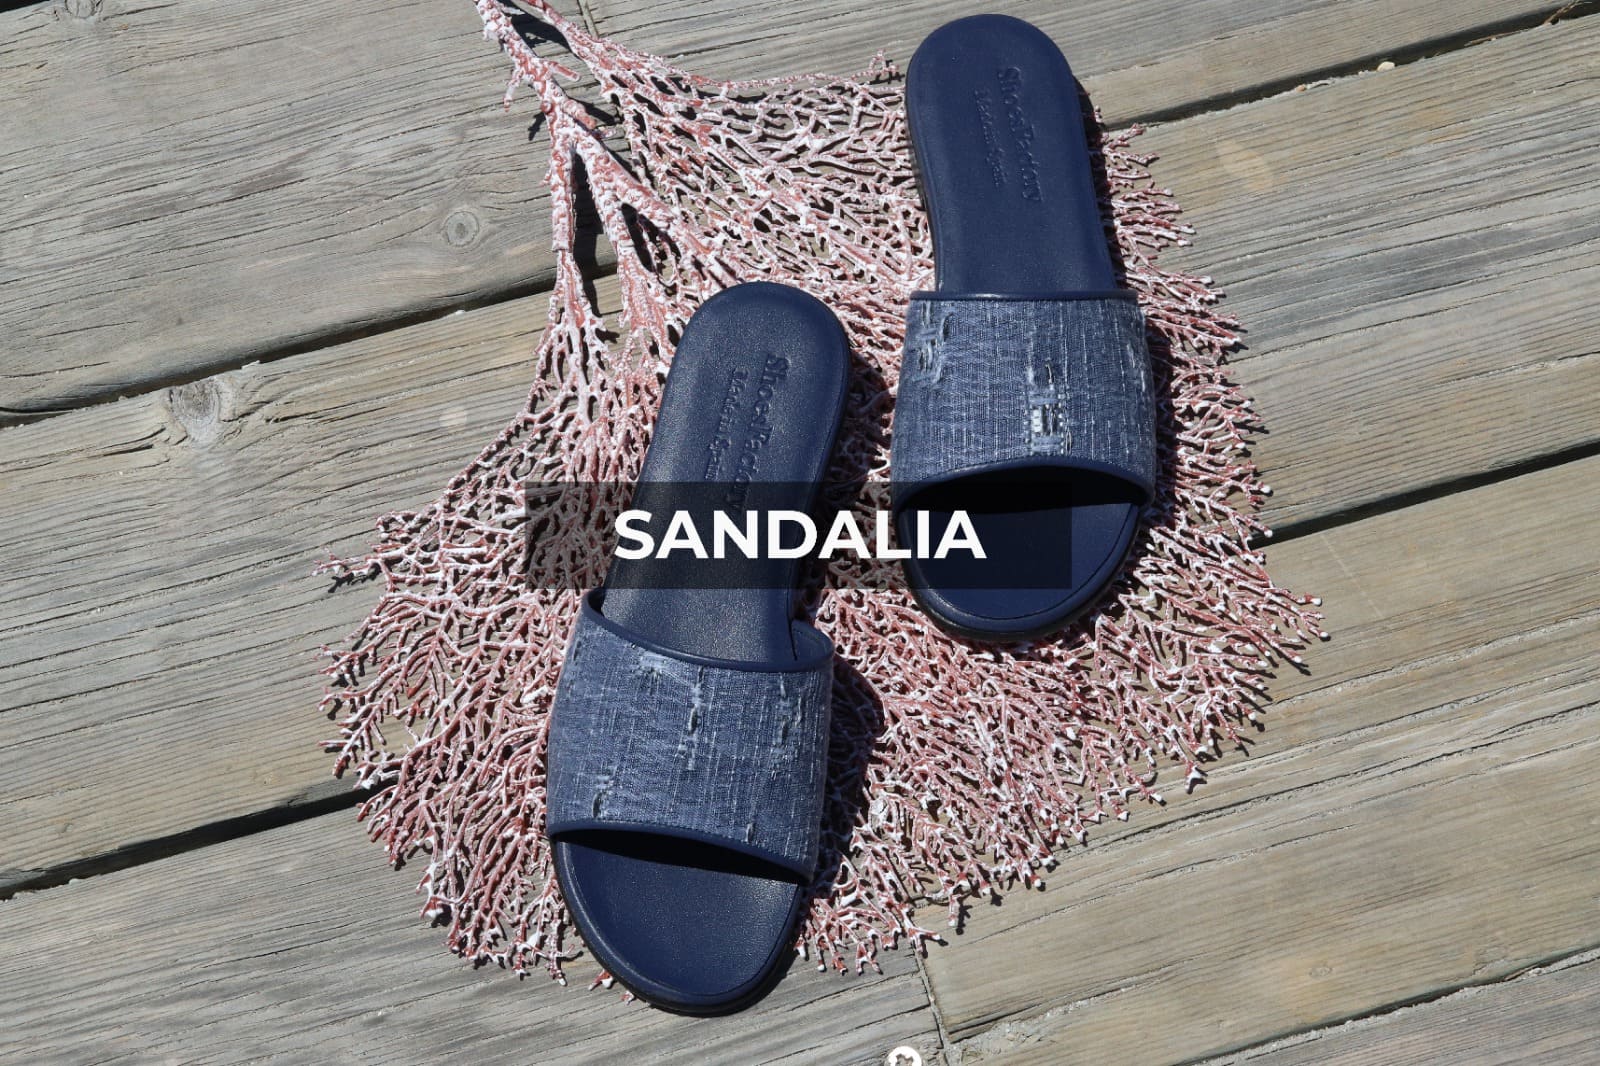 Sandals.Newcollection